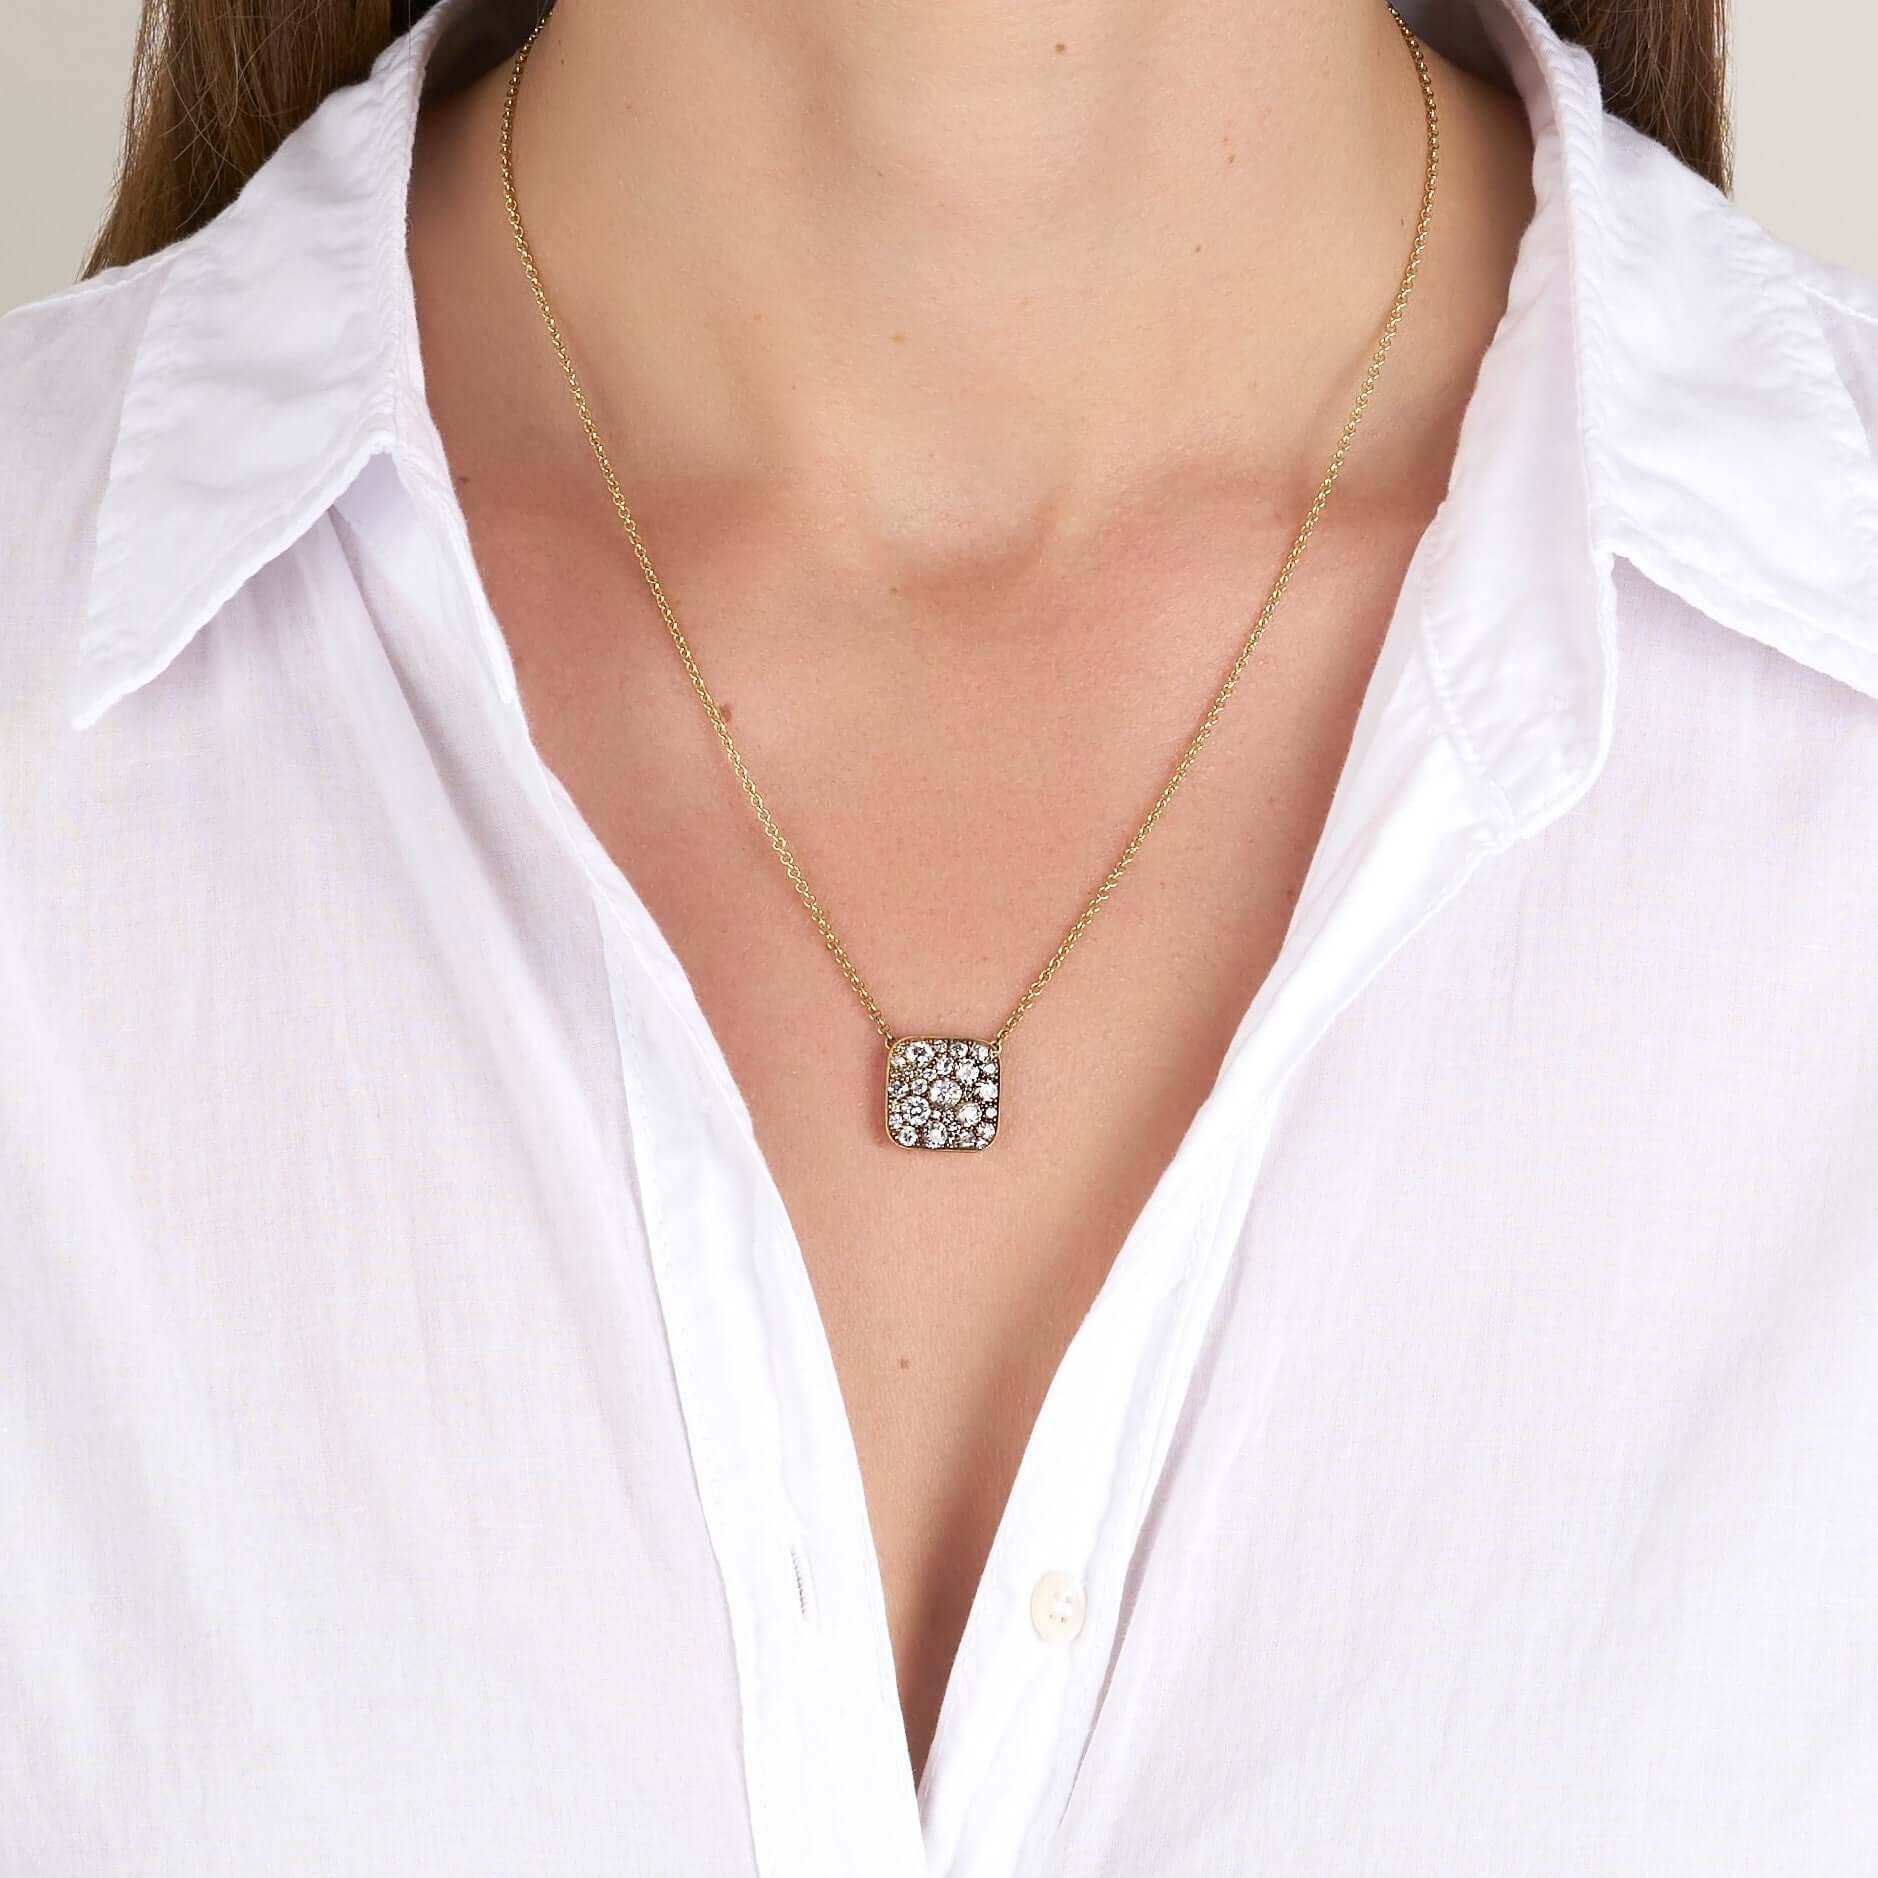 SINGLE STONE SQUARE COBBLESTONE PENDANT NECKLACE featuring Approximately 2.00ctw various old cut and round brilliant cut diamonds set in a handcrafted 18K yellow gold pendant. Price may vary according to total diamond weight. Available in an oxidized or p